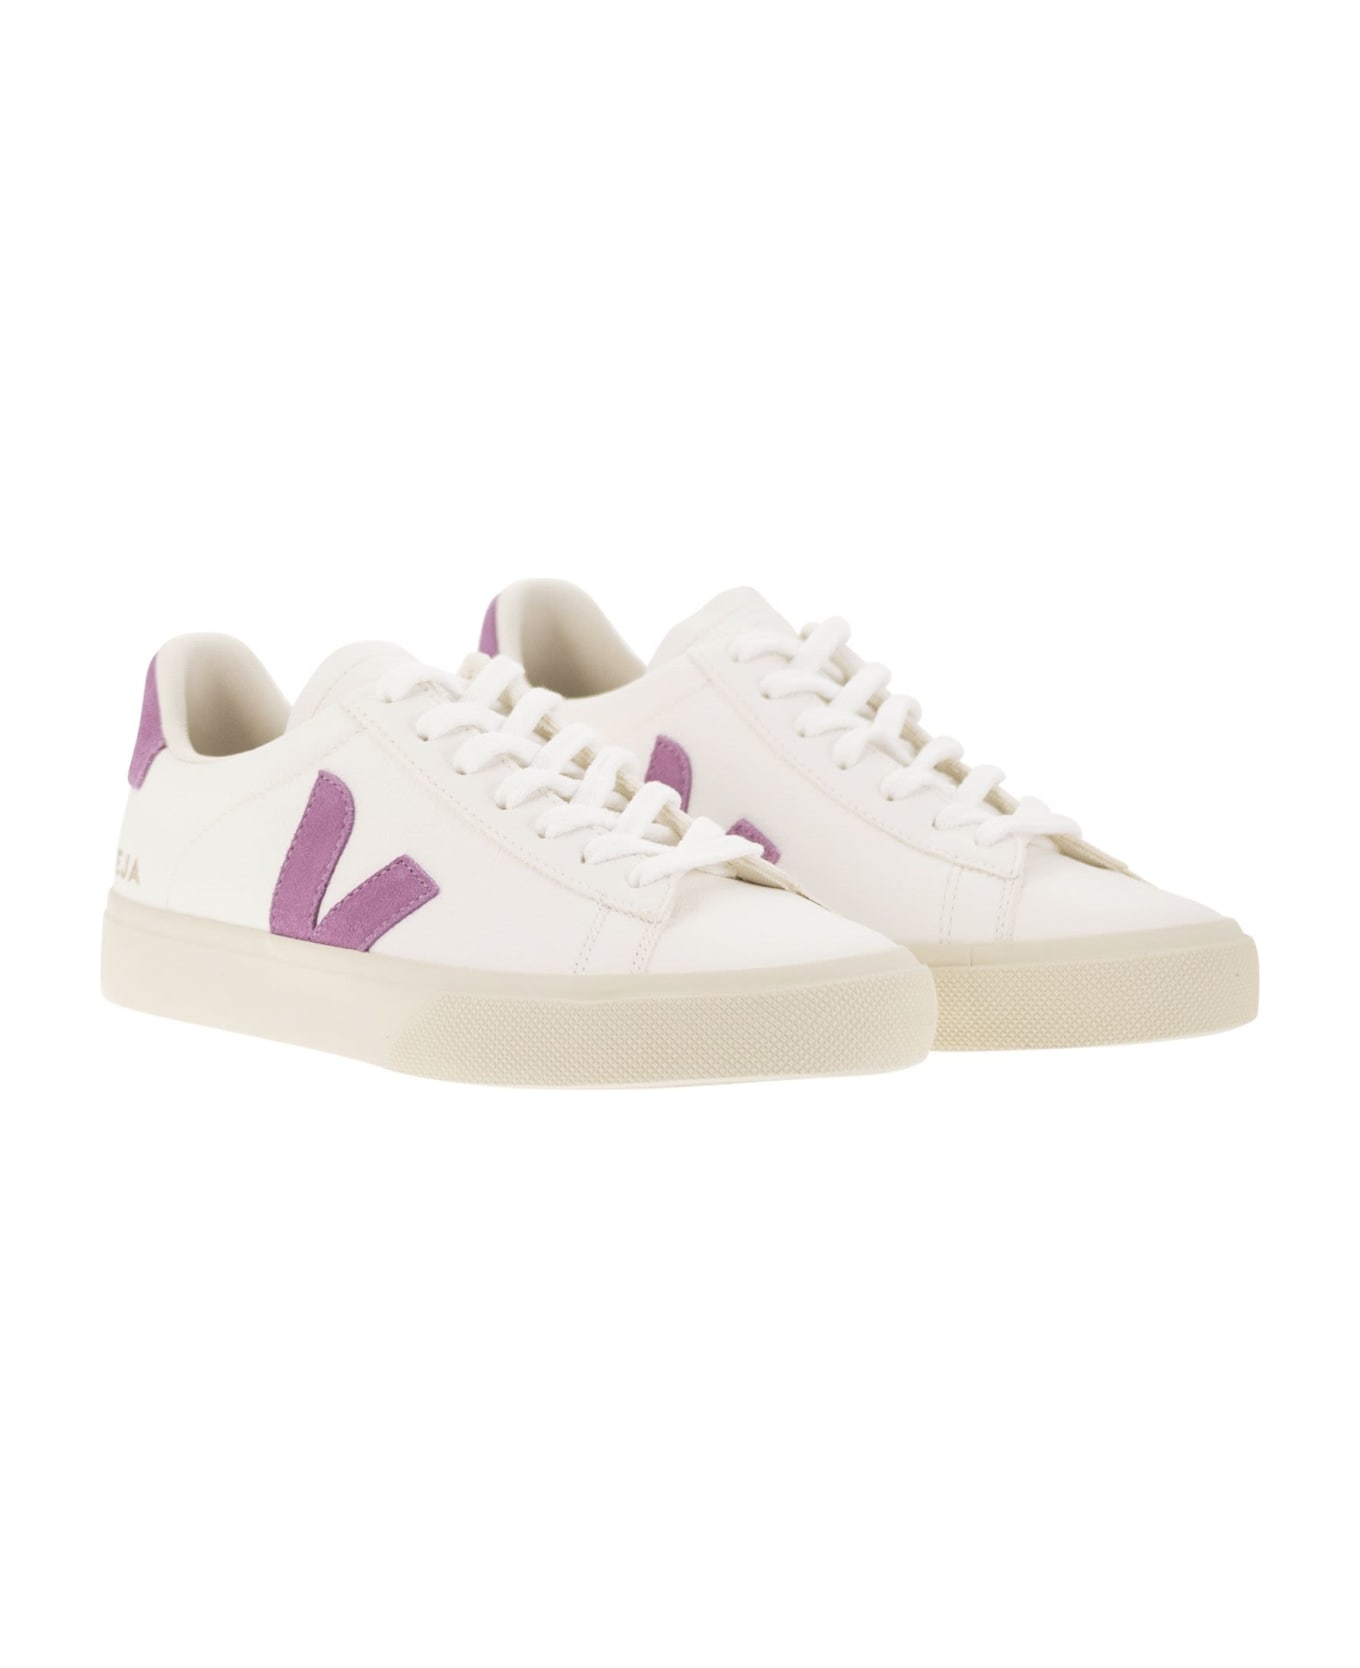 Veja Chromefree Leather Trainers - White/pink スニーカー